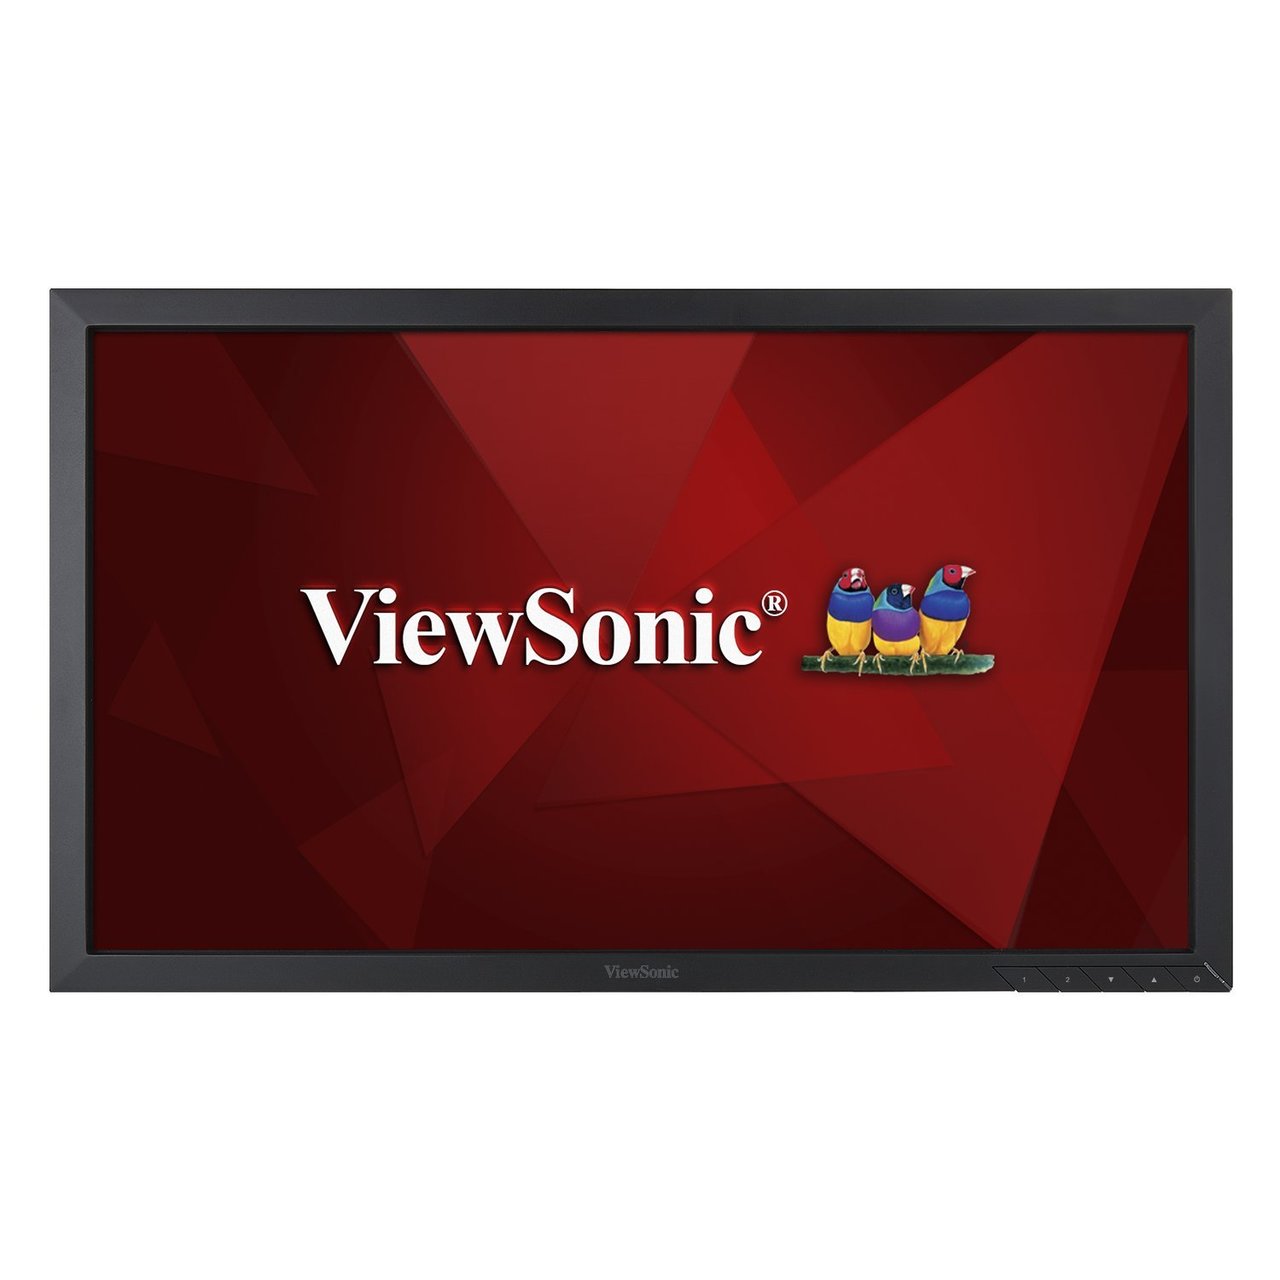 ViewSonic VA2252SM-2-S 22" Widescreen LED Backlit LCD Monitor - Certified Refurbished